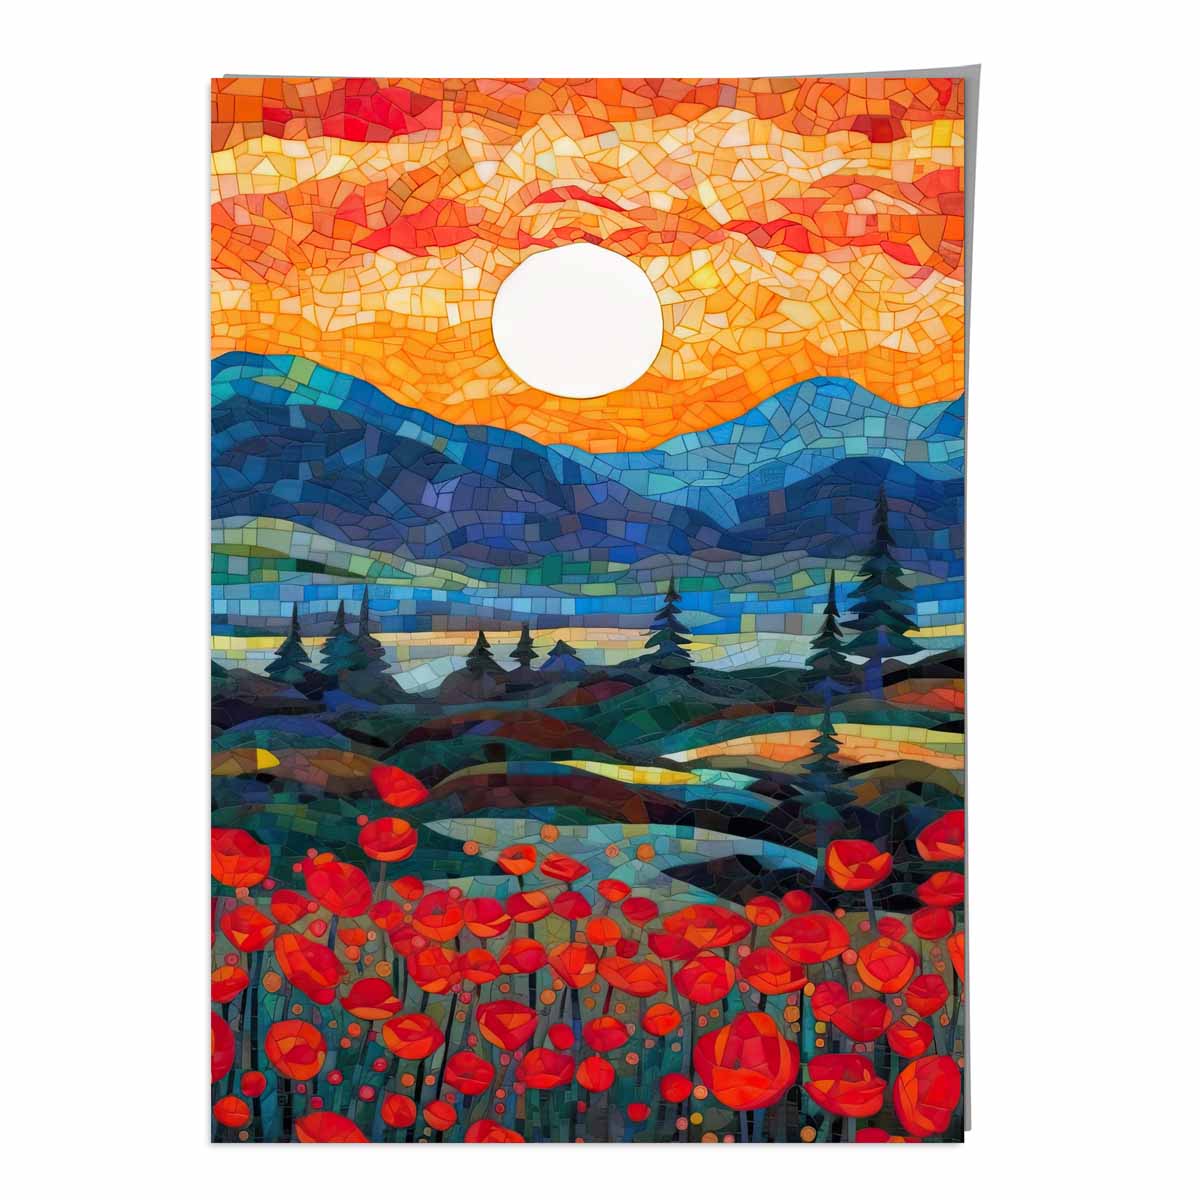 Sunrise Mountains and Poppy Fields Mosaic Abstract Style Painting Art Print